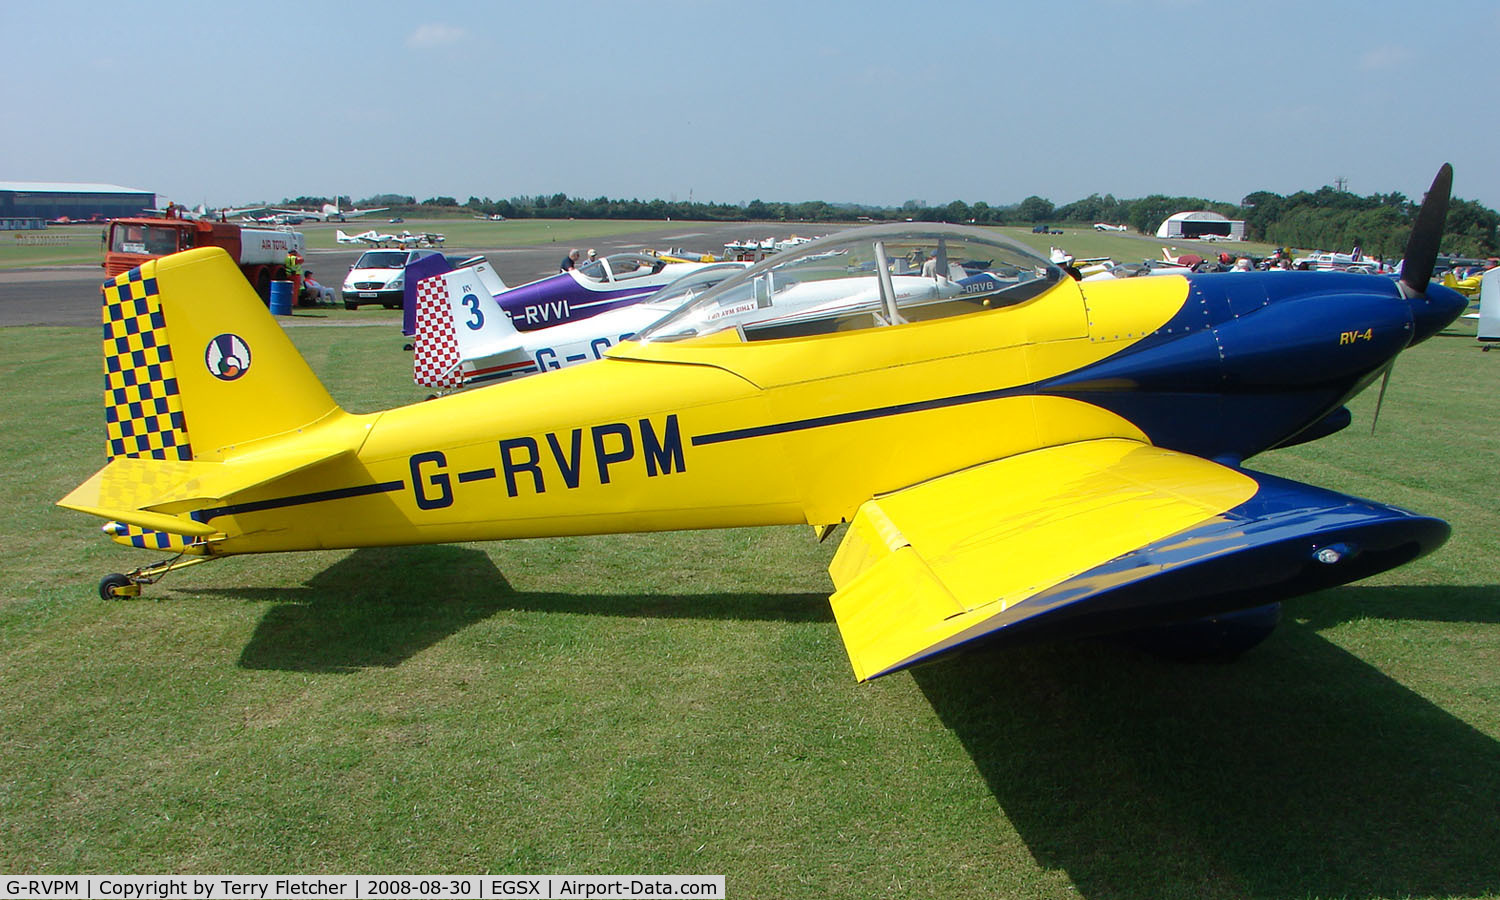 G-RVPM, 2003 Vans RV-4 C/N PFA 181-12270, Participant in the 2008 RV Fly-in at North Weald Uk